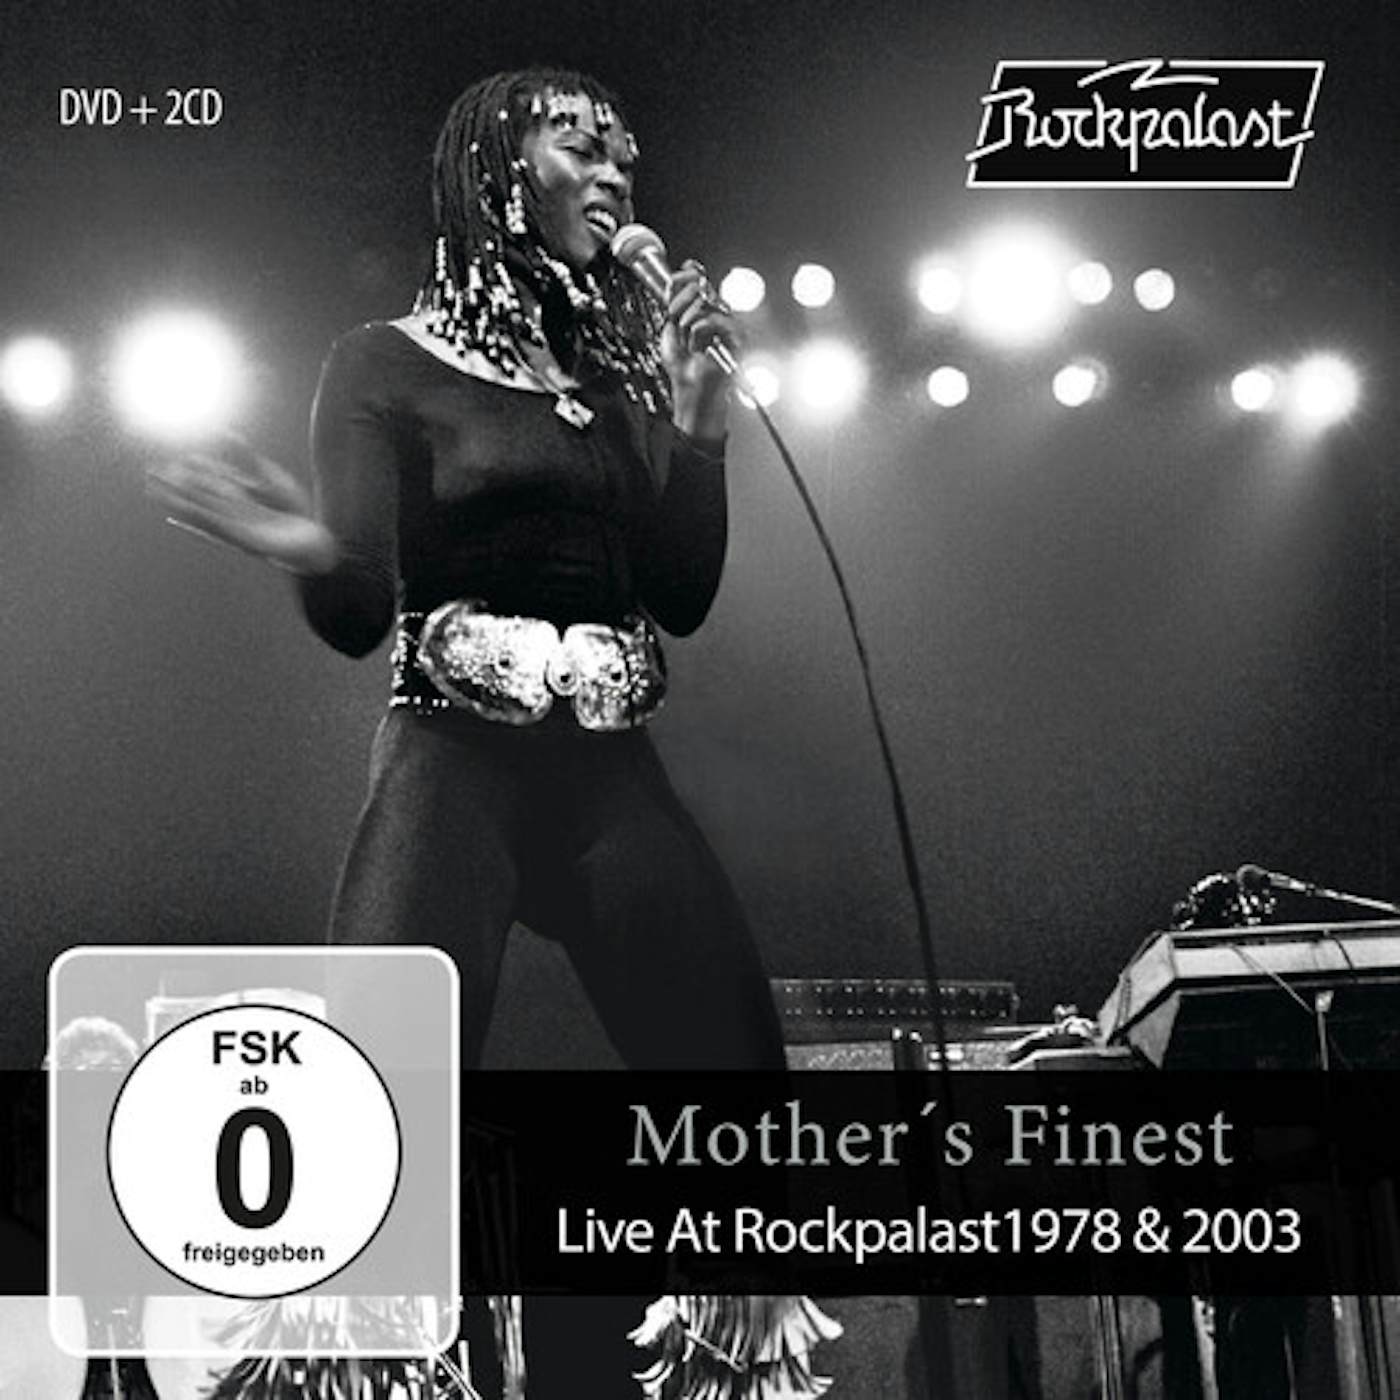 Mother's Finest LIVE AT ROCKPALAST 1978 & 2003 CD